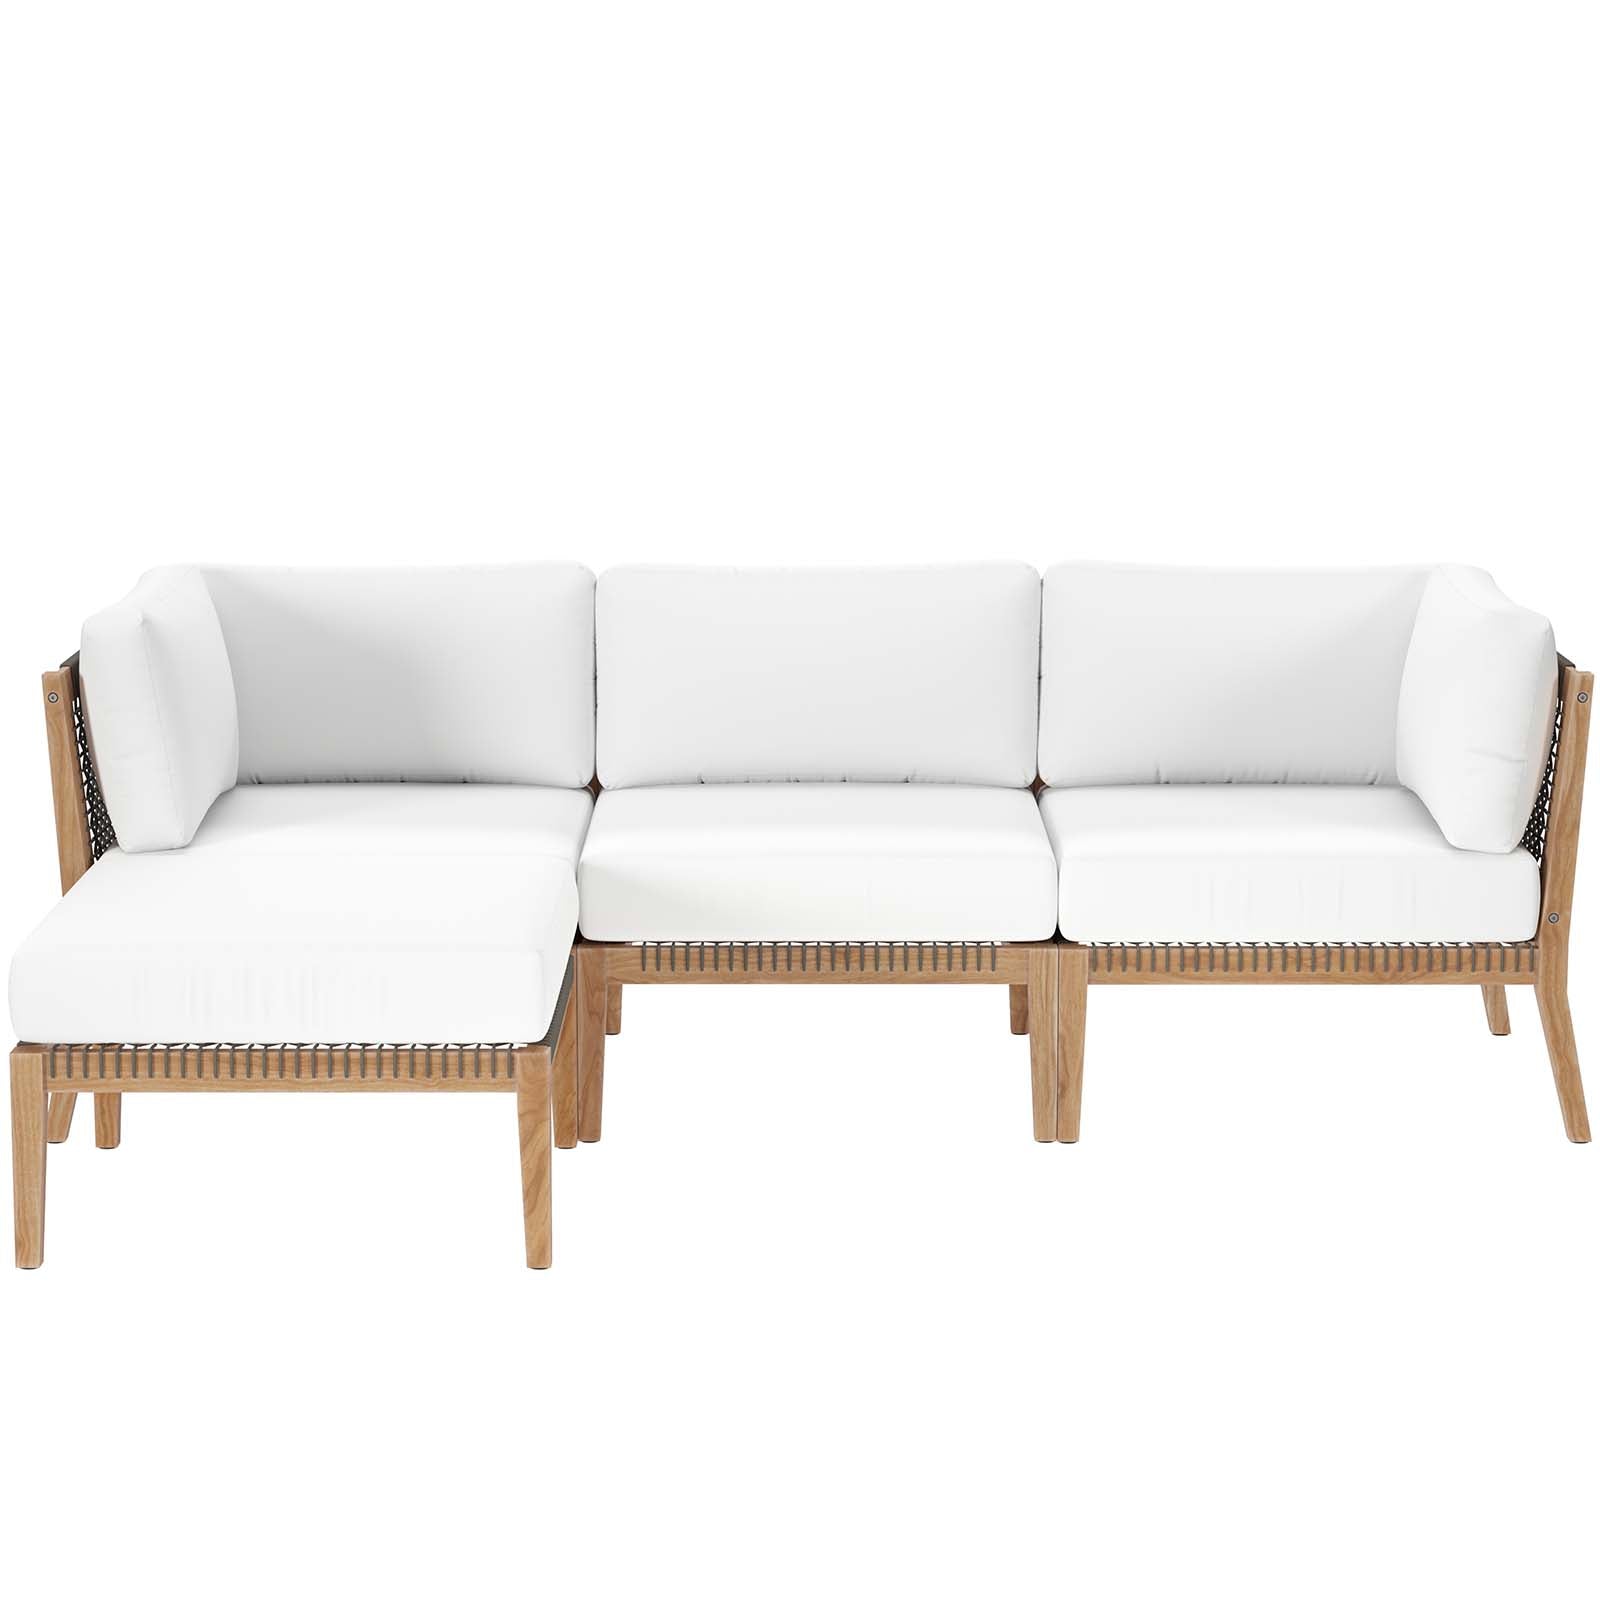 Modway Outdoor Sofas - Clearwater-Outdoor-Patio-Teak-Wood-4-Piece-Sectional-Sofa-Gray-White